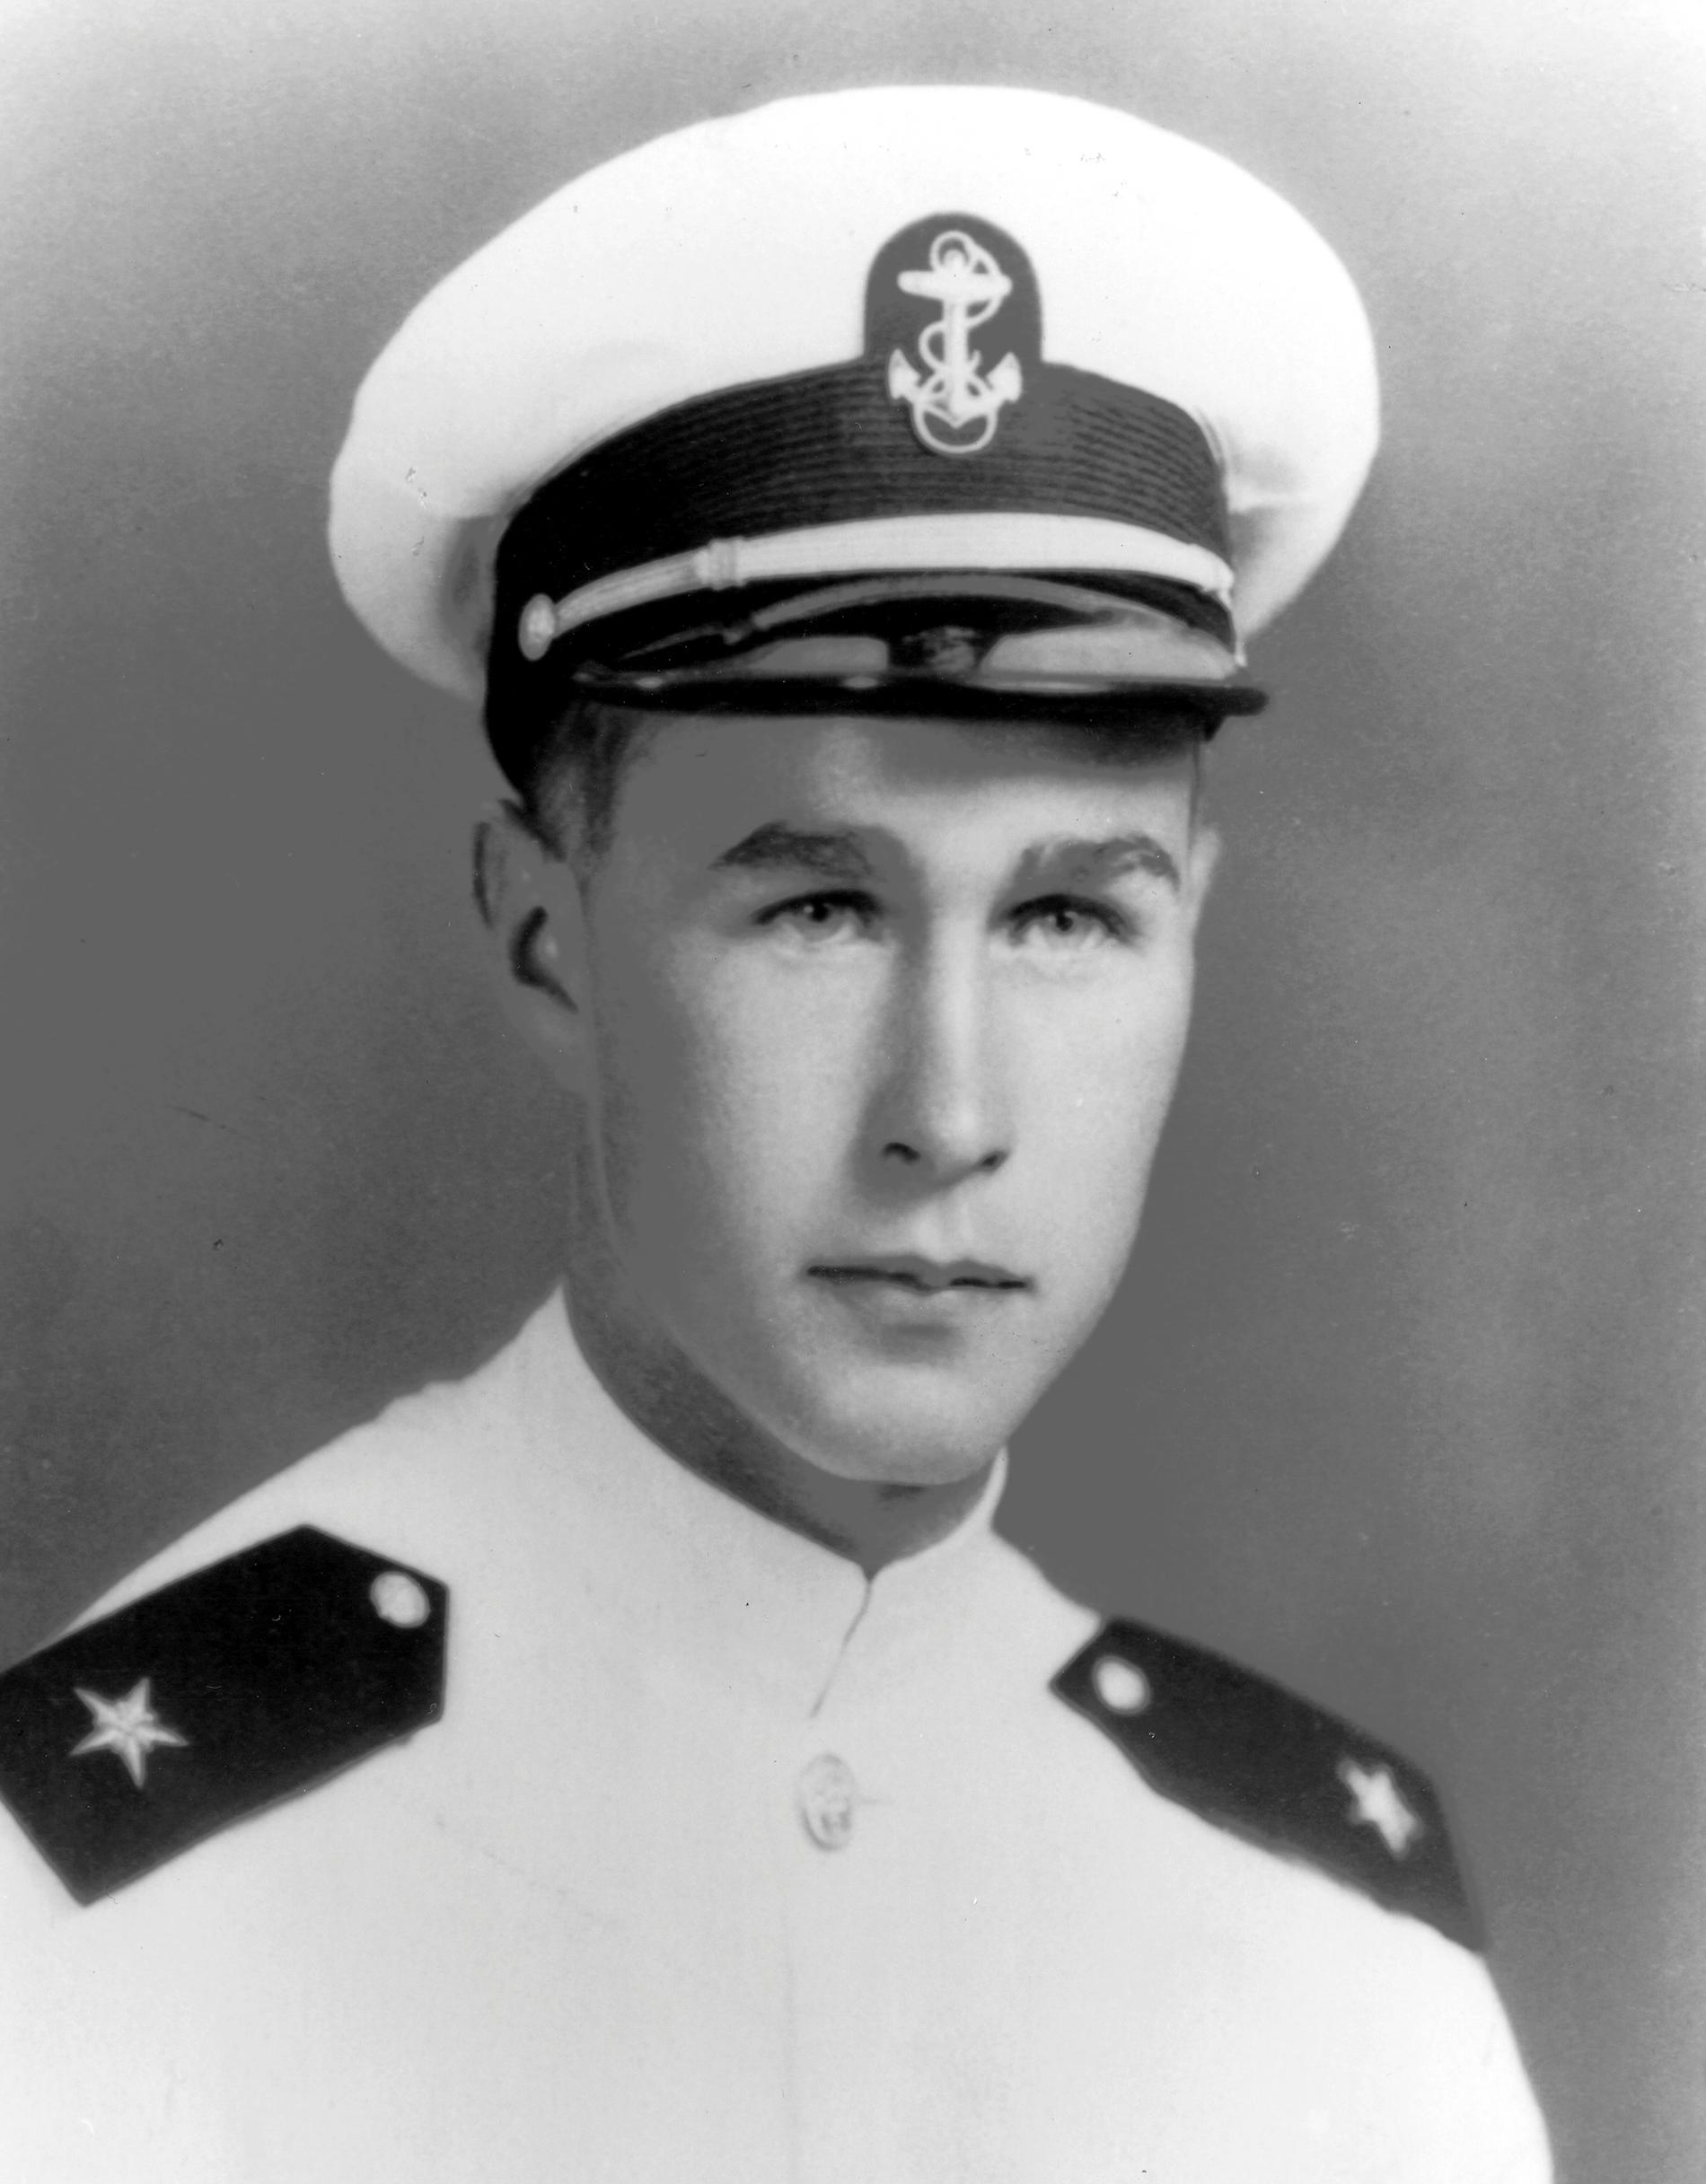 George H. W. Bush, in uniform as a Naval Aviator Cadet, is pictured in this early 1943 